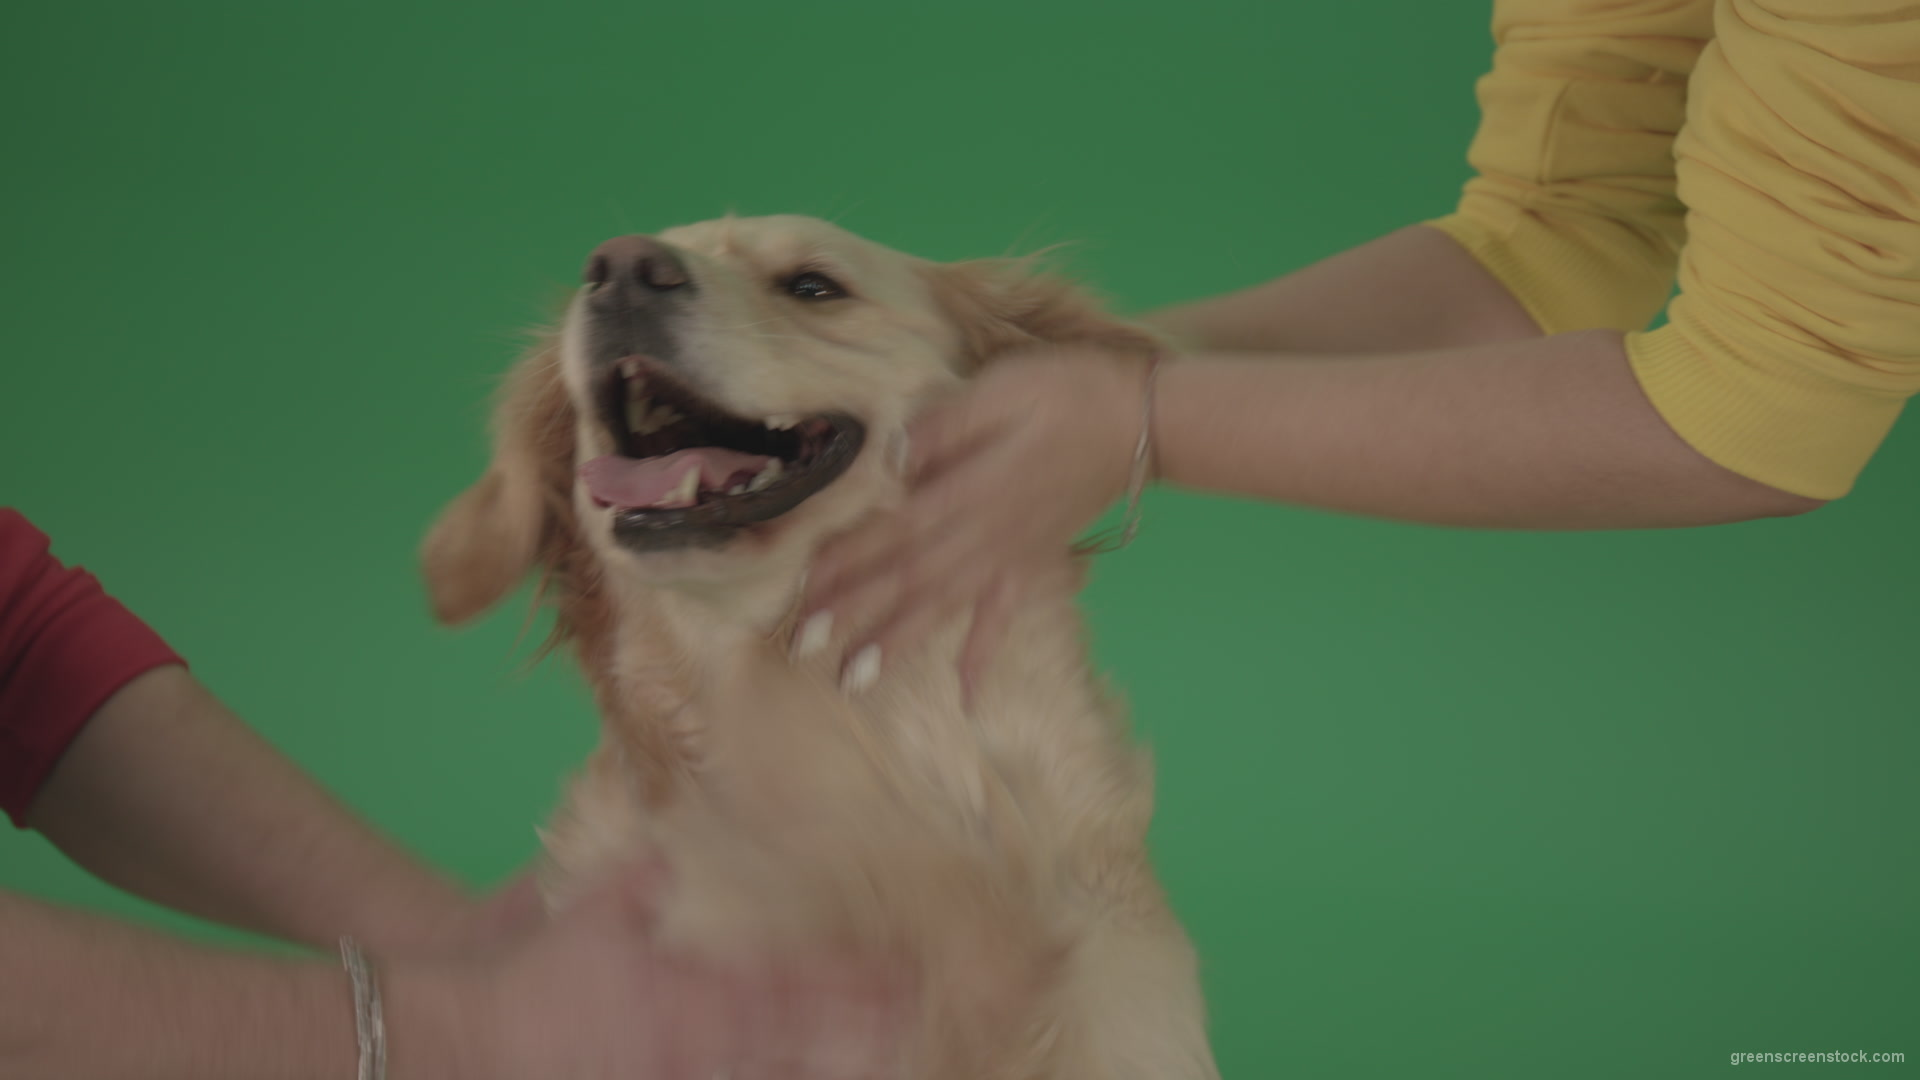 Funny-Golden-Retriever-owners-stroke-from-two-hands-hunter-Dog-isolated-on-green-screen-4K-video-footage_005 Green Screen Stock